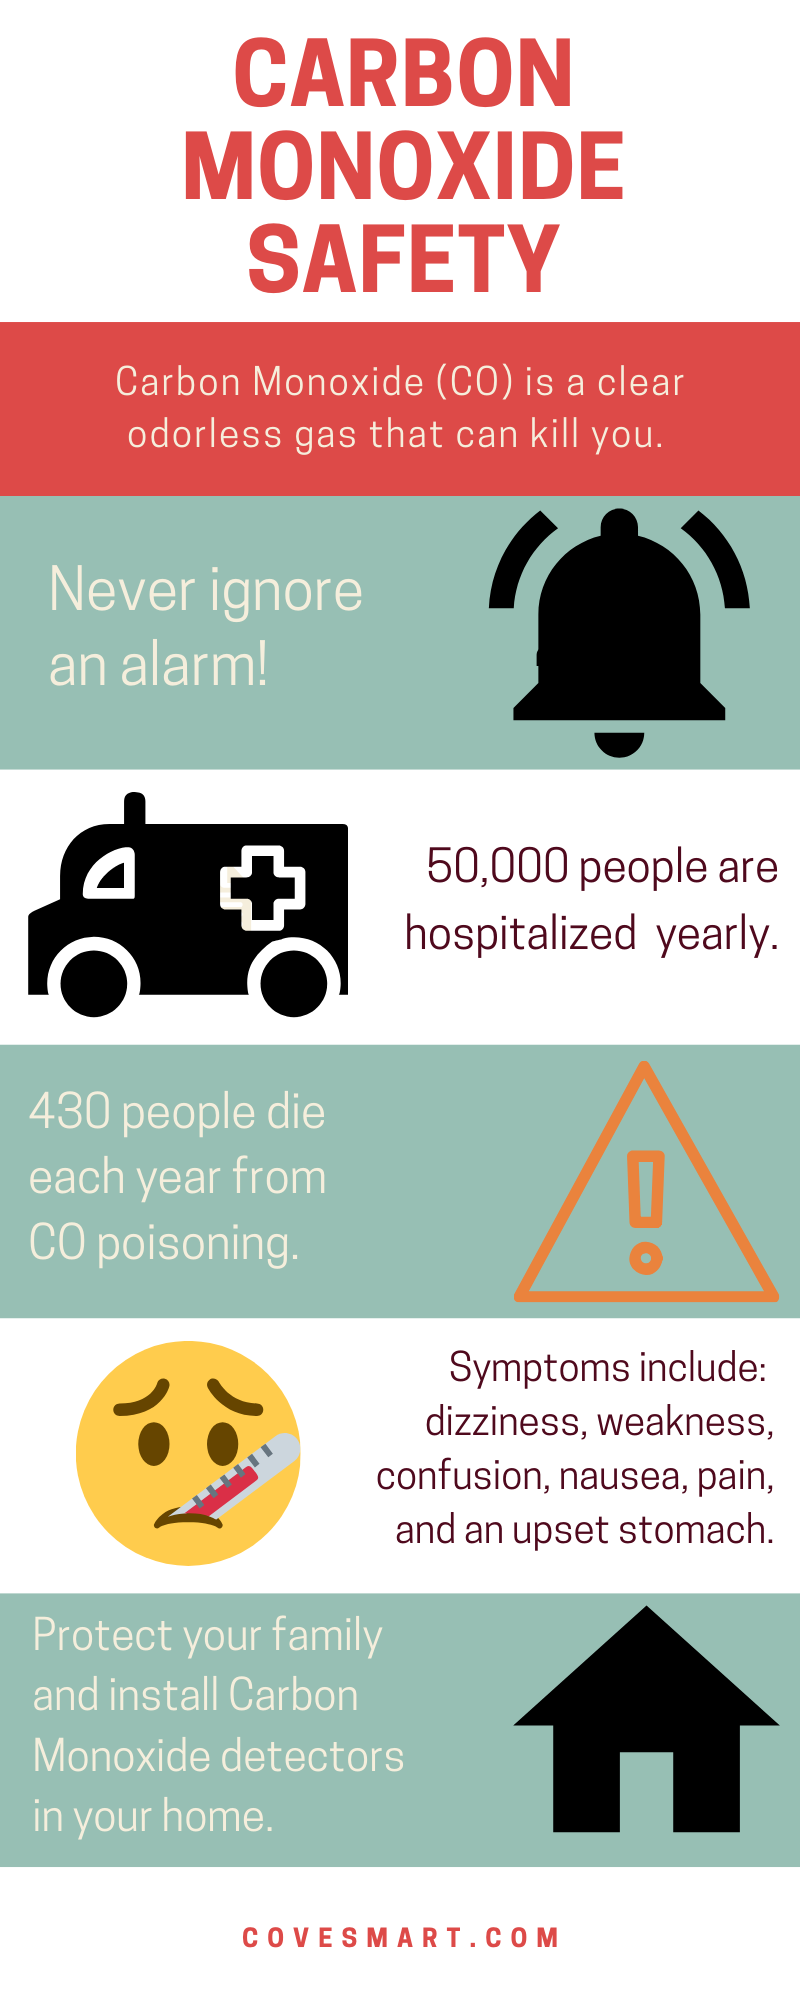 Is Co Heavier Than Air Infographic. Carbon monoxide safety. Never ignore an alarm.Install CO detectors to protect your family